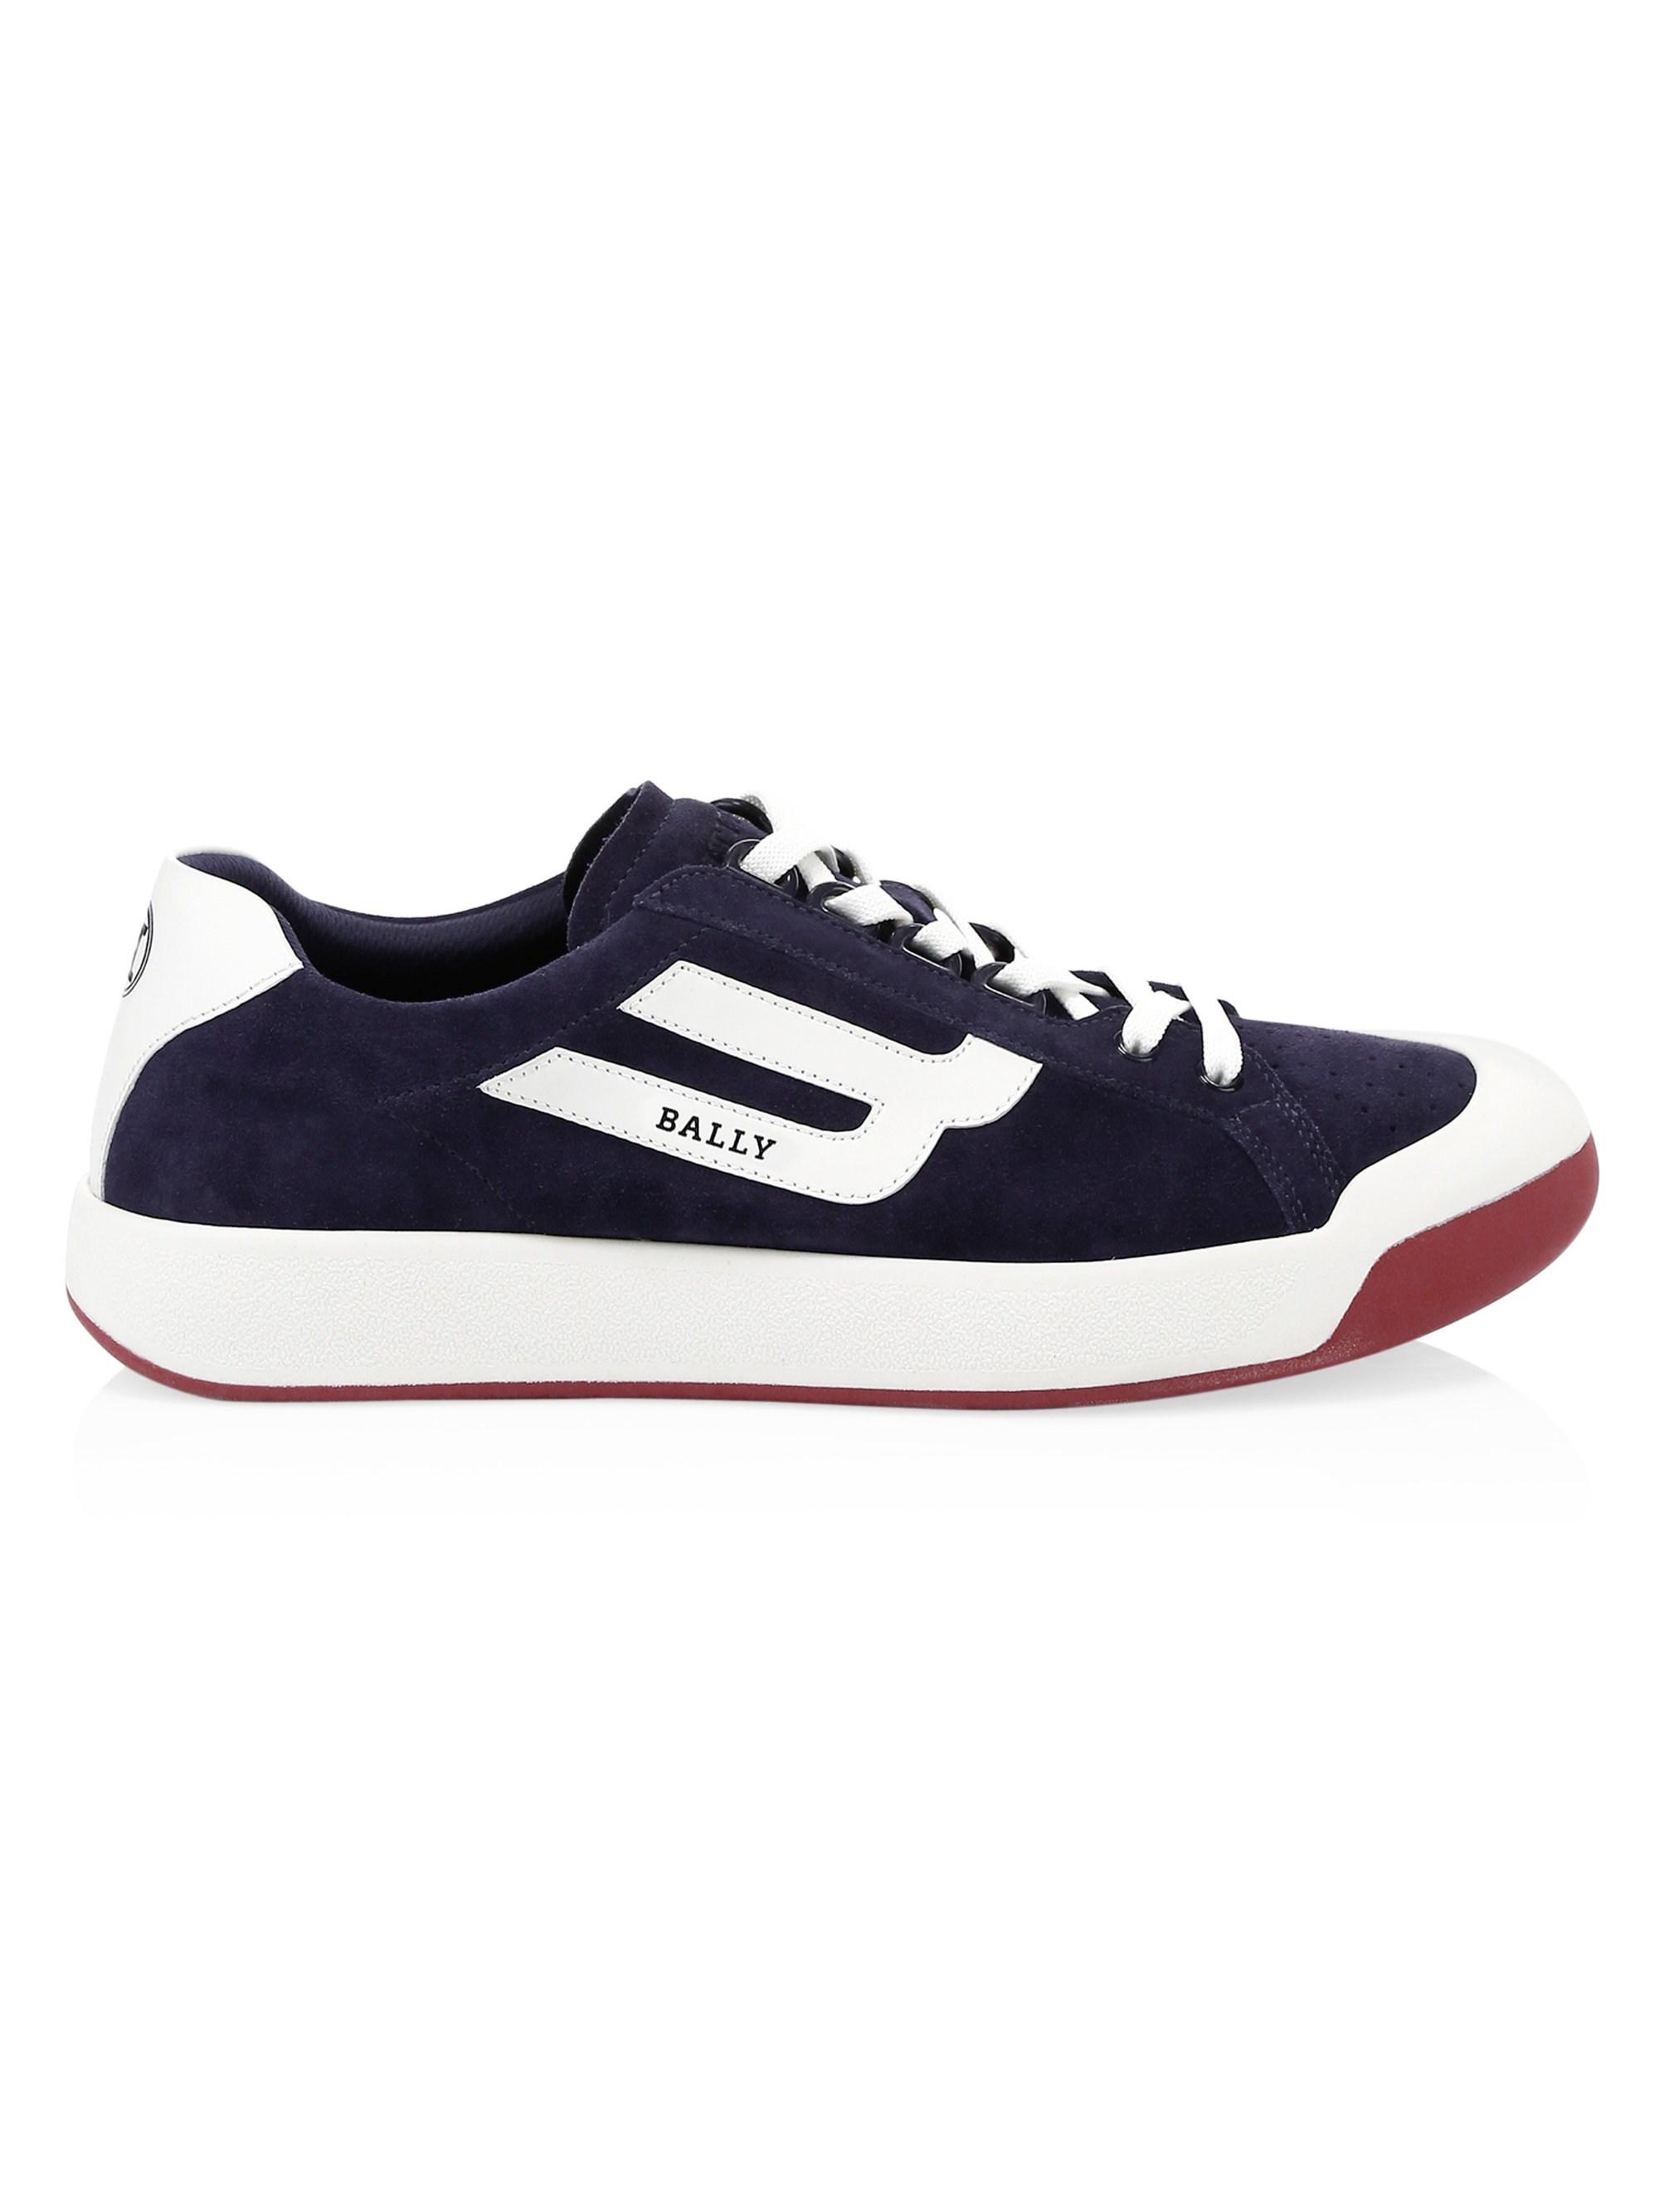 Bally Leather The New Competition Sneakers in Blue for Men - Save 58% - Lyst